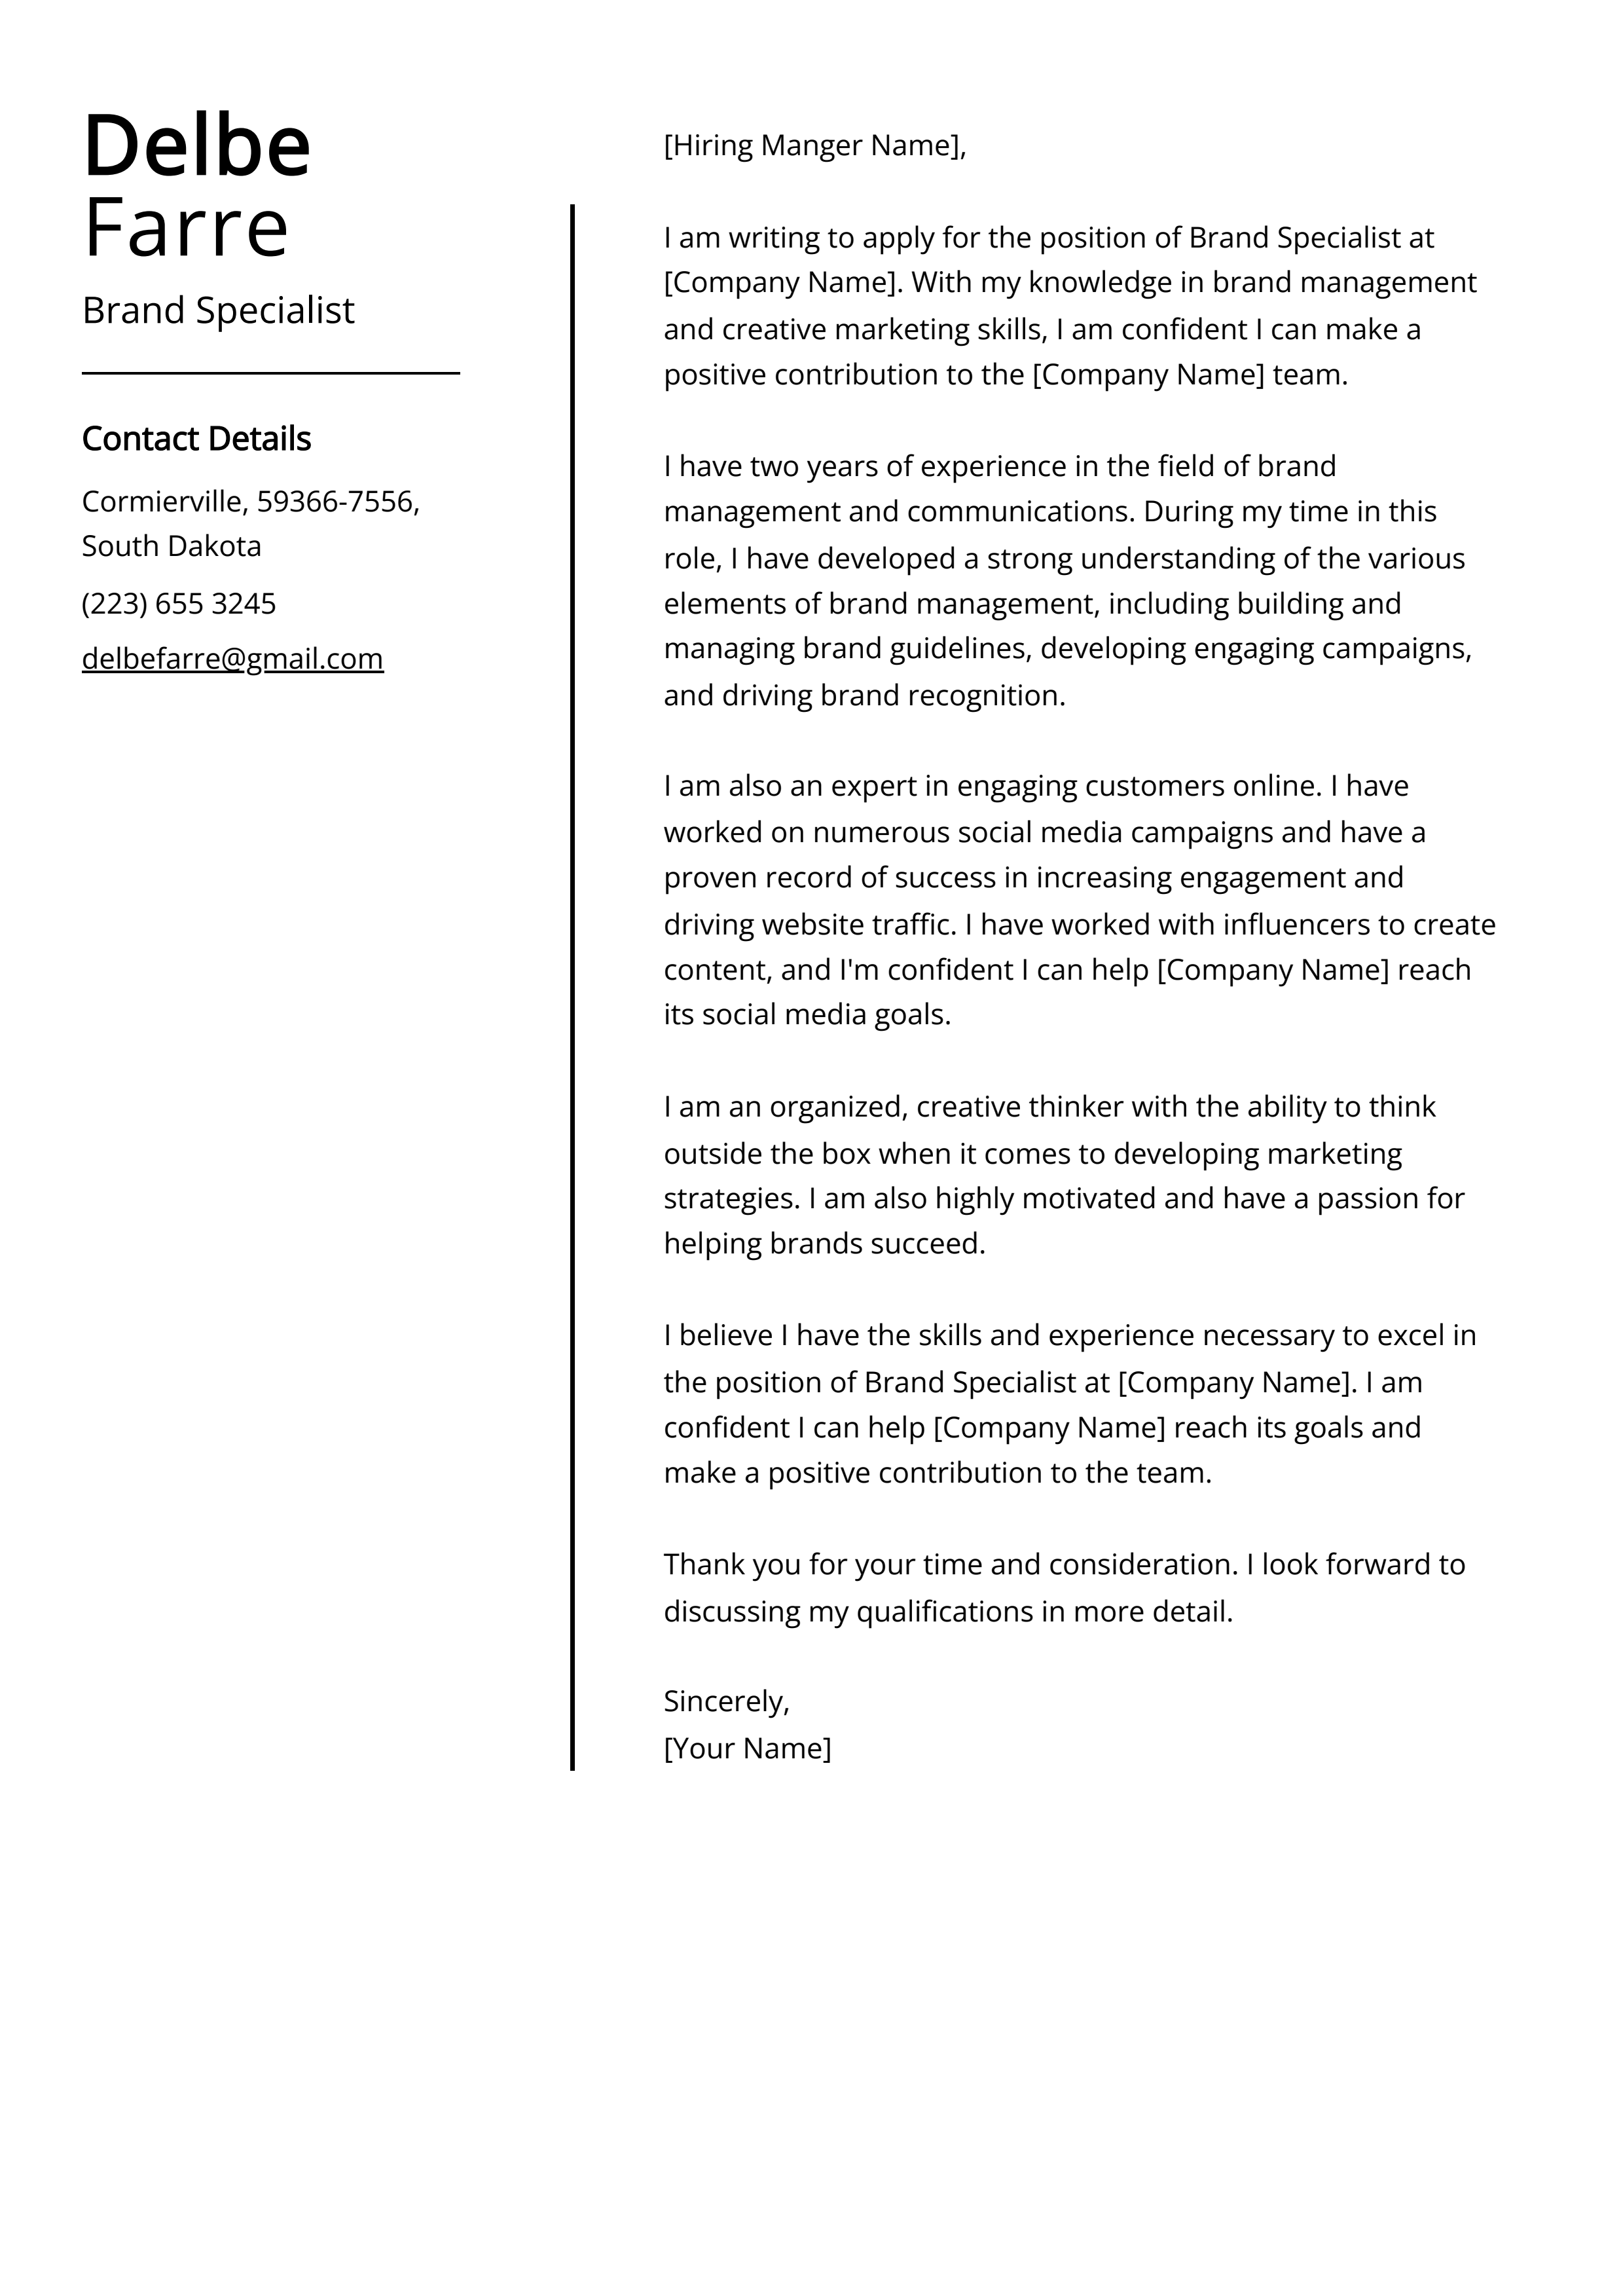 Brand Specialist Cover Letter Example